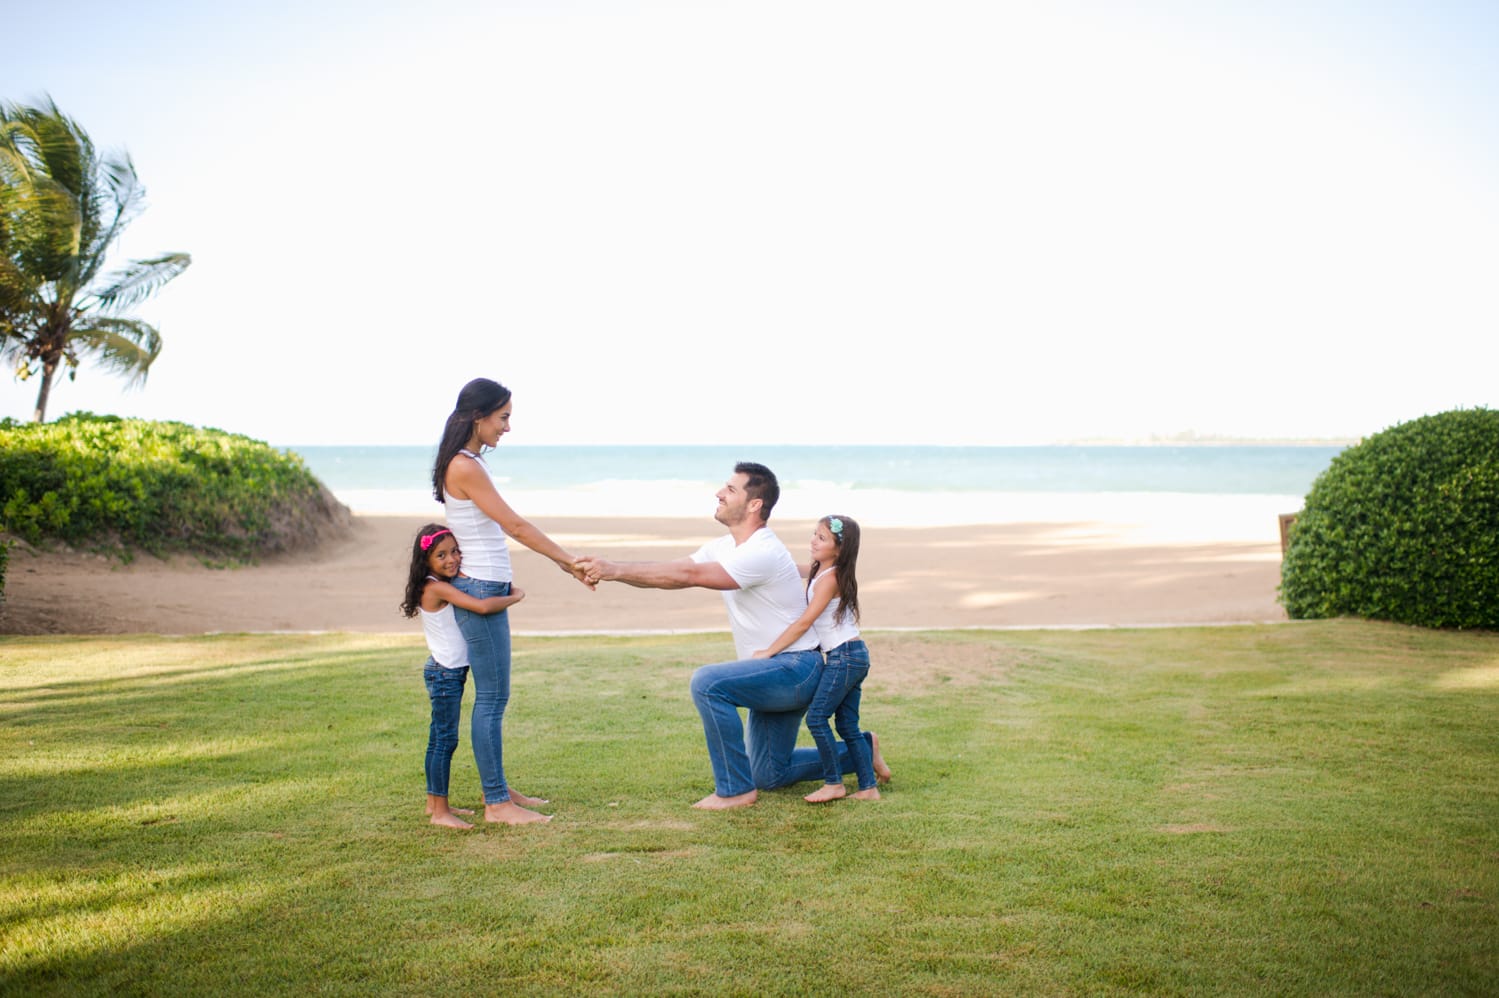 family session and marriage proposal at St Regis Bahia Beach Resort by Puerto Rico wedding photographer Camille Fontanez